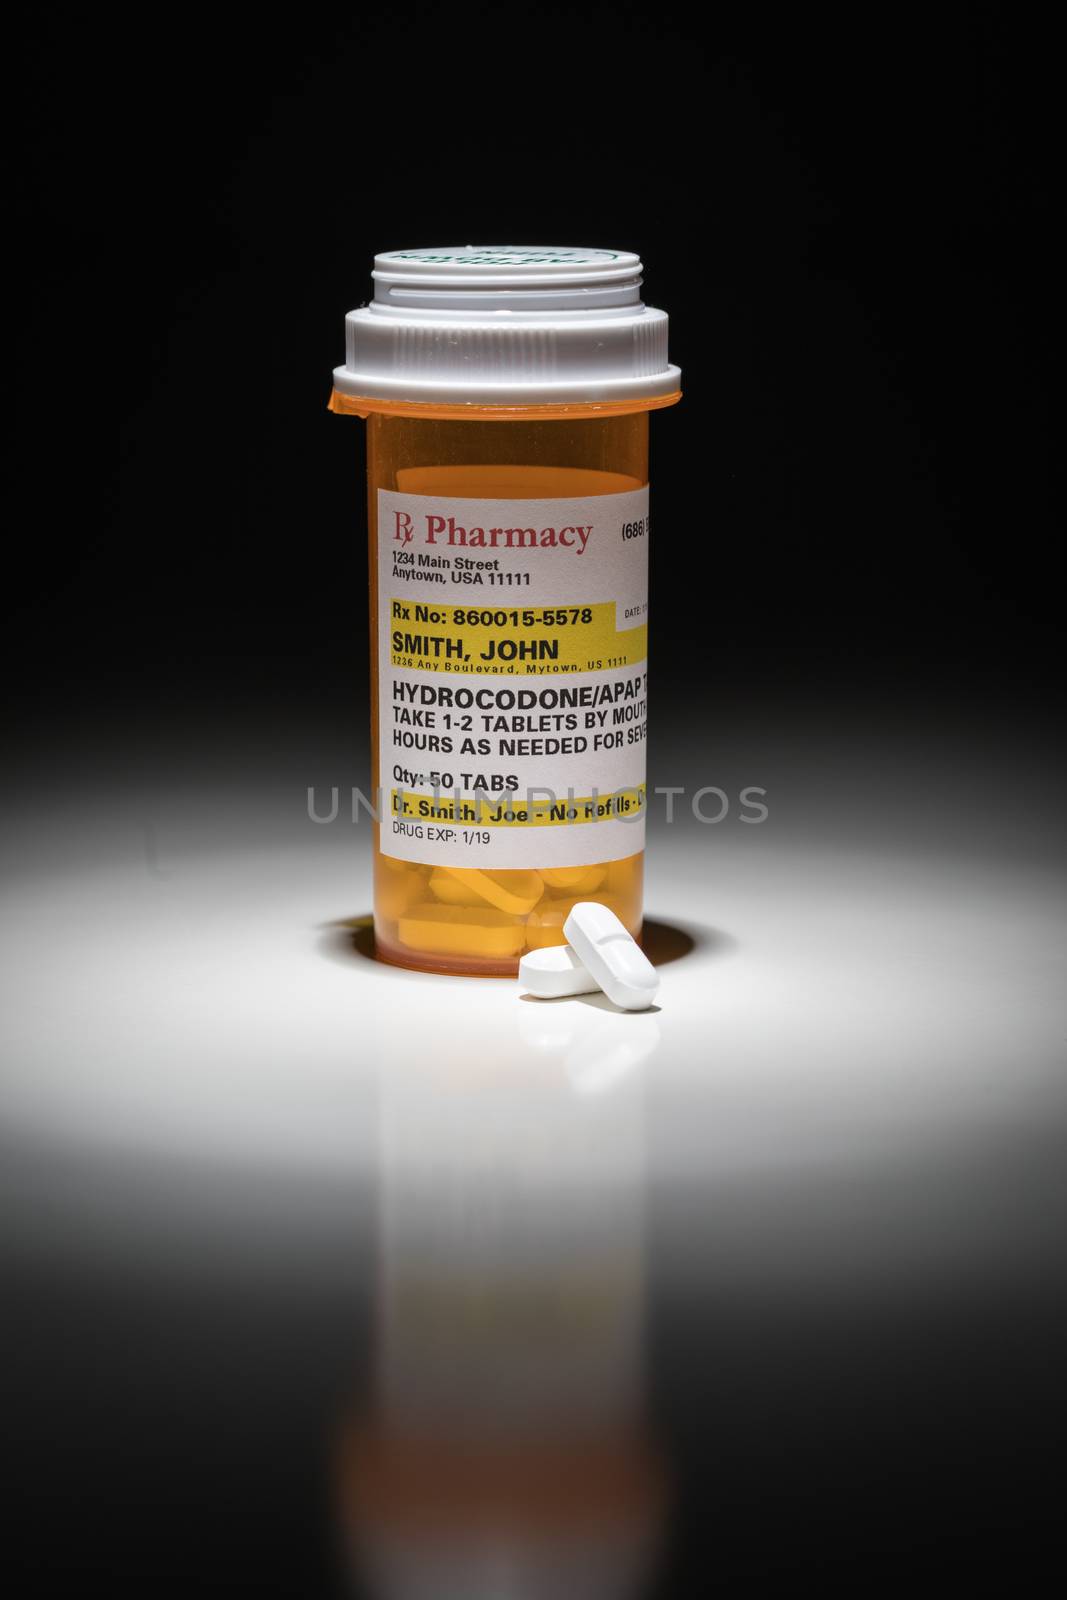 Hydrocodone Pills and Prescription Bottle with Non Proprietary Label. No model release required - contains ficticious information.